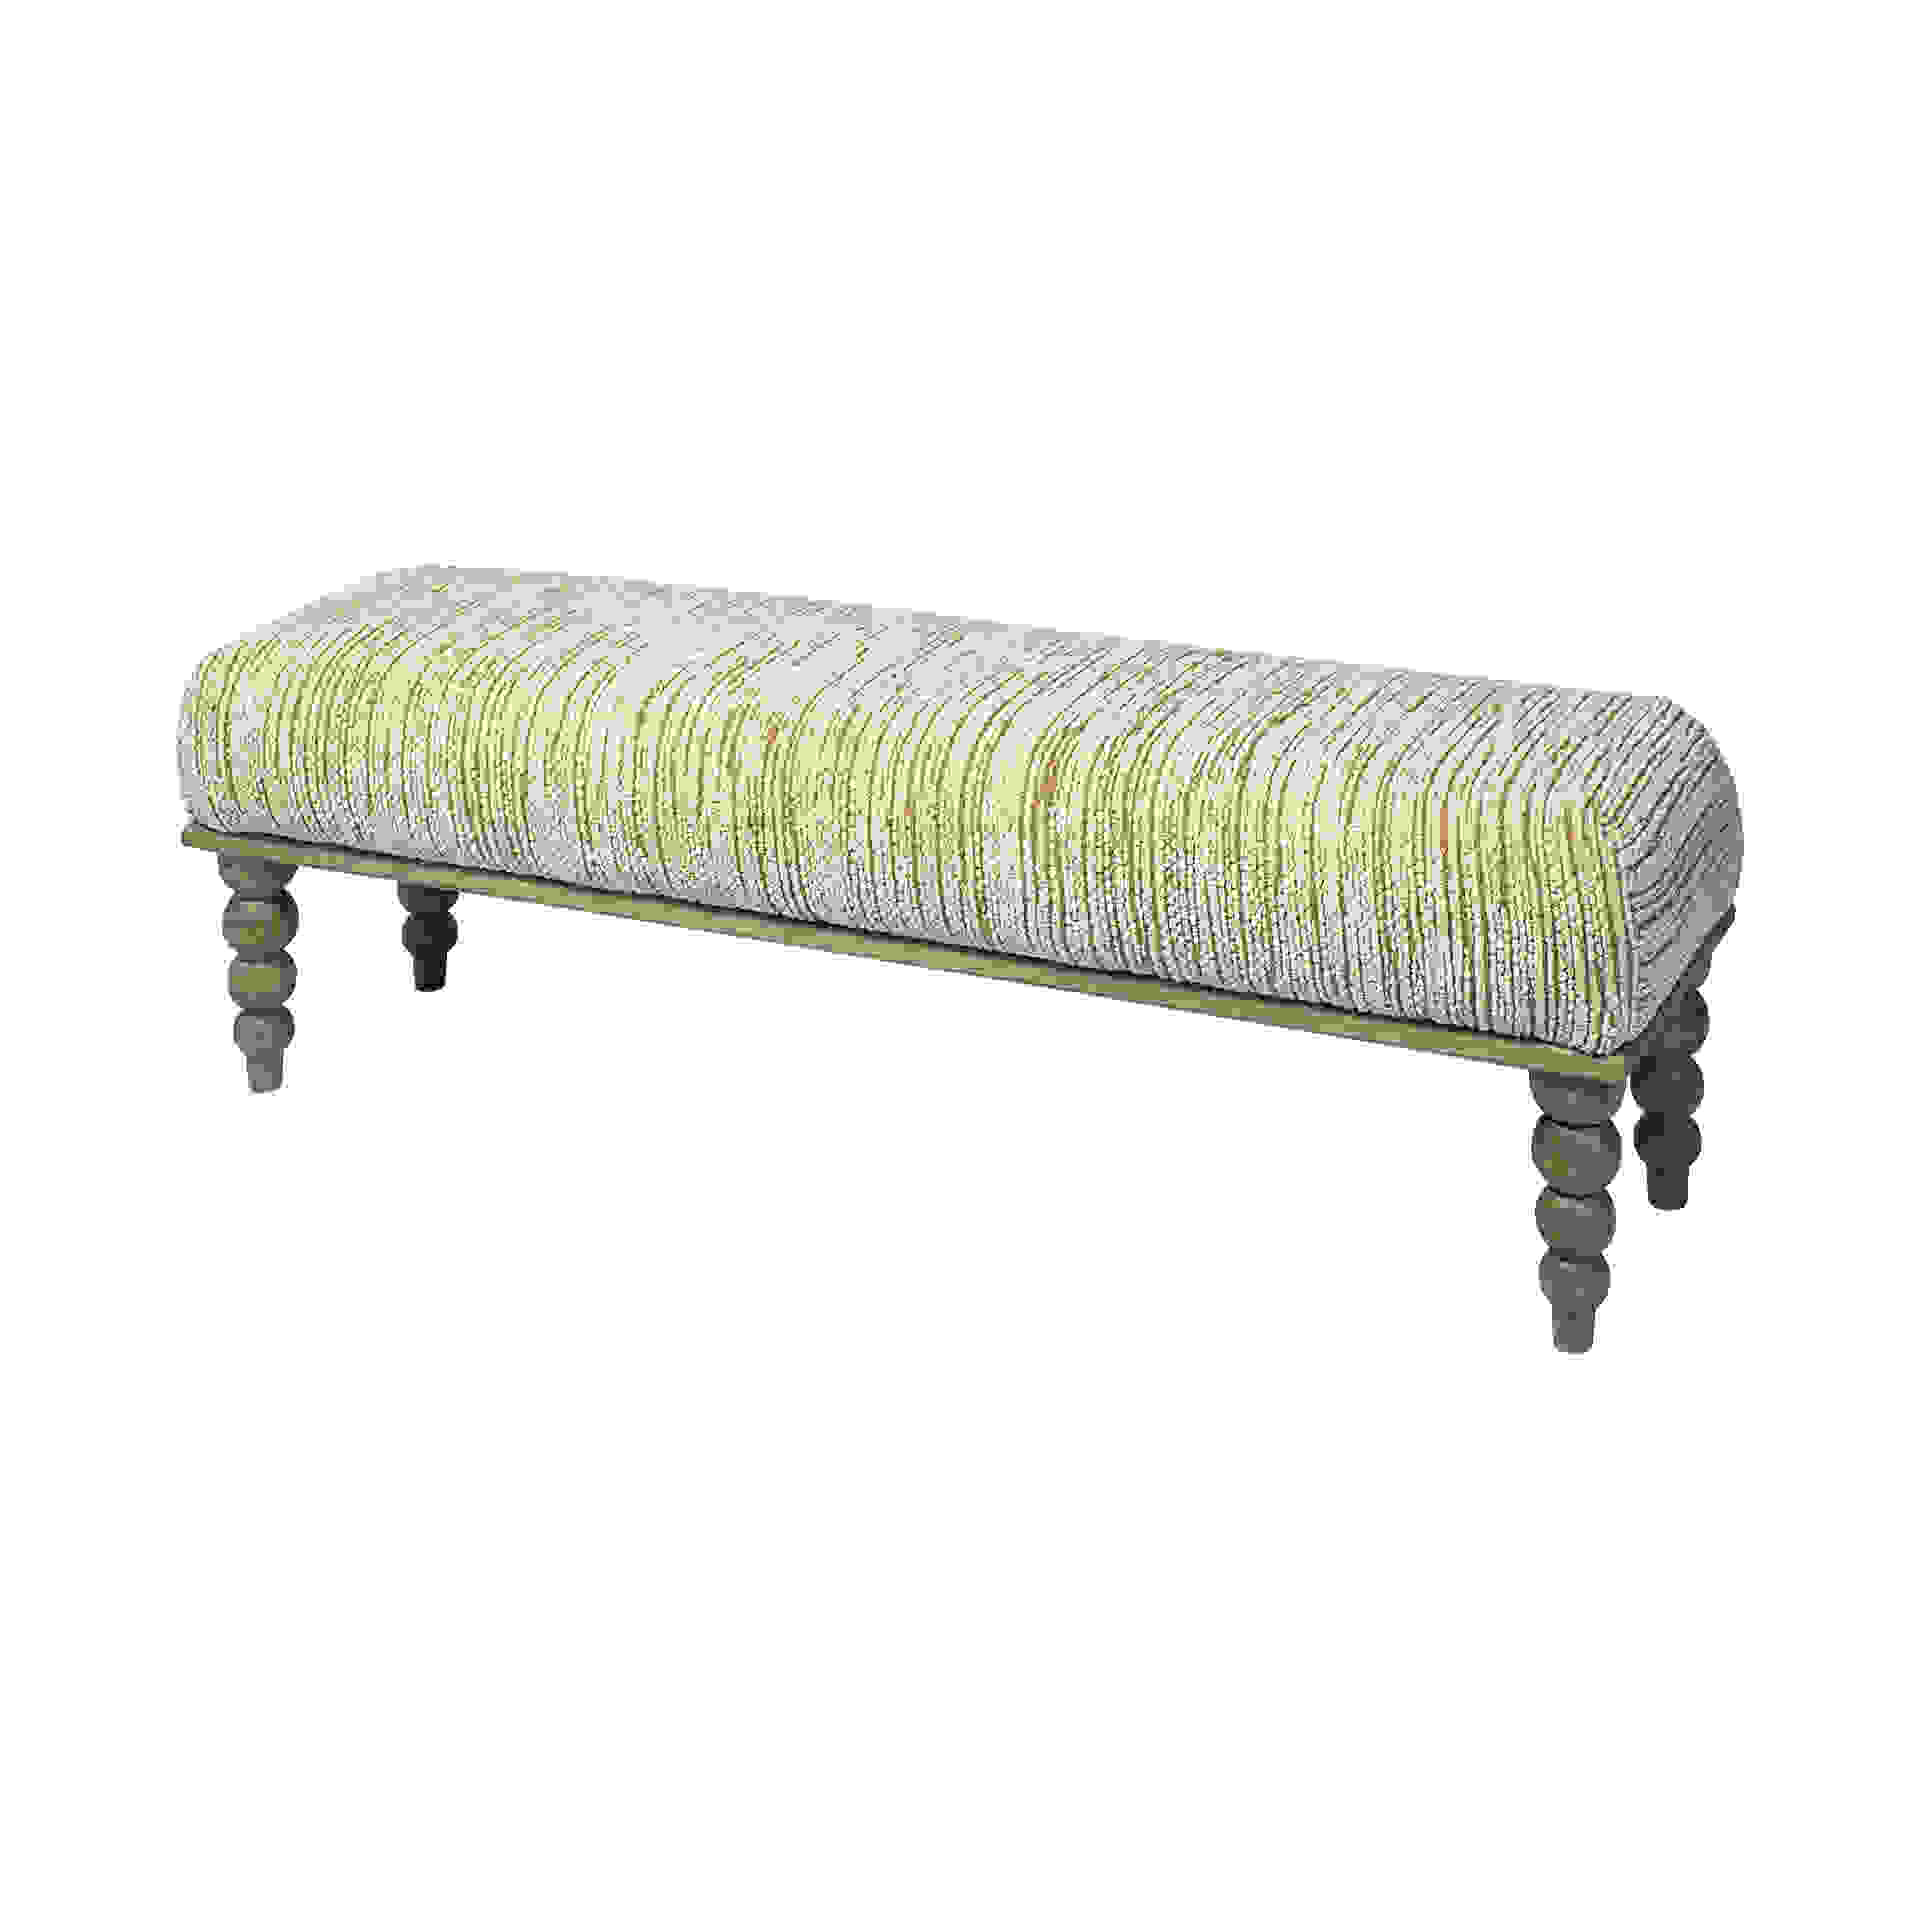 Rectangular Indian Mango Wood/Natural-Brown Polished W/ Upholstered Cream Seat Accent Bench